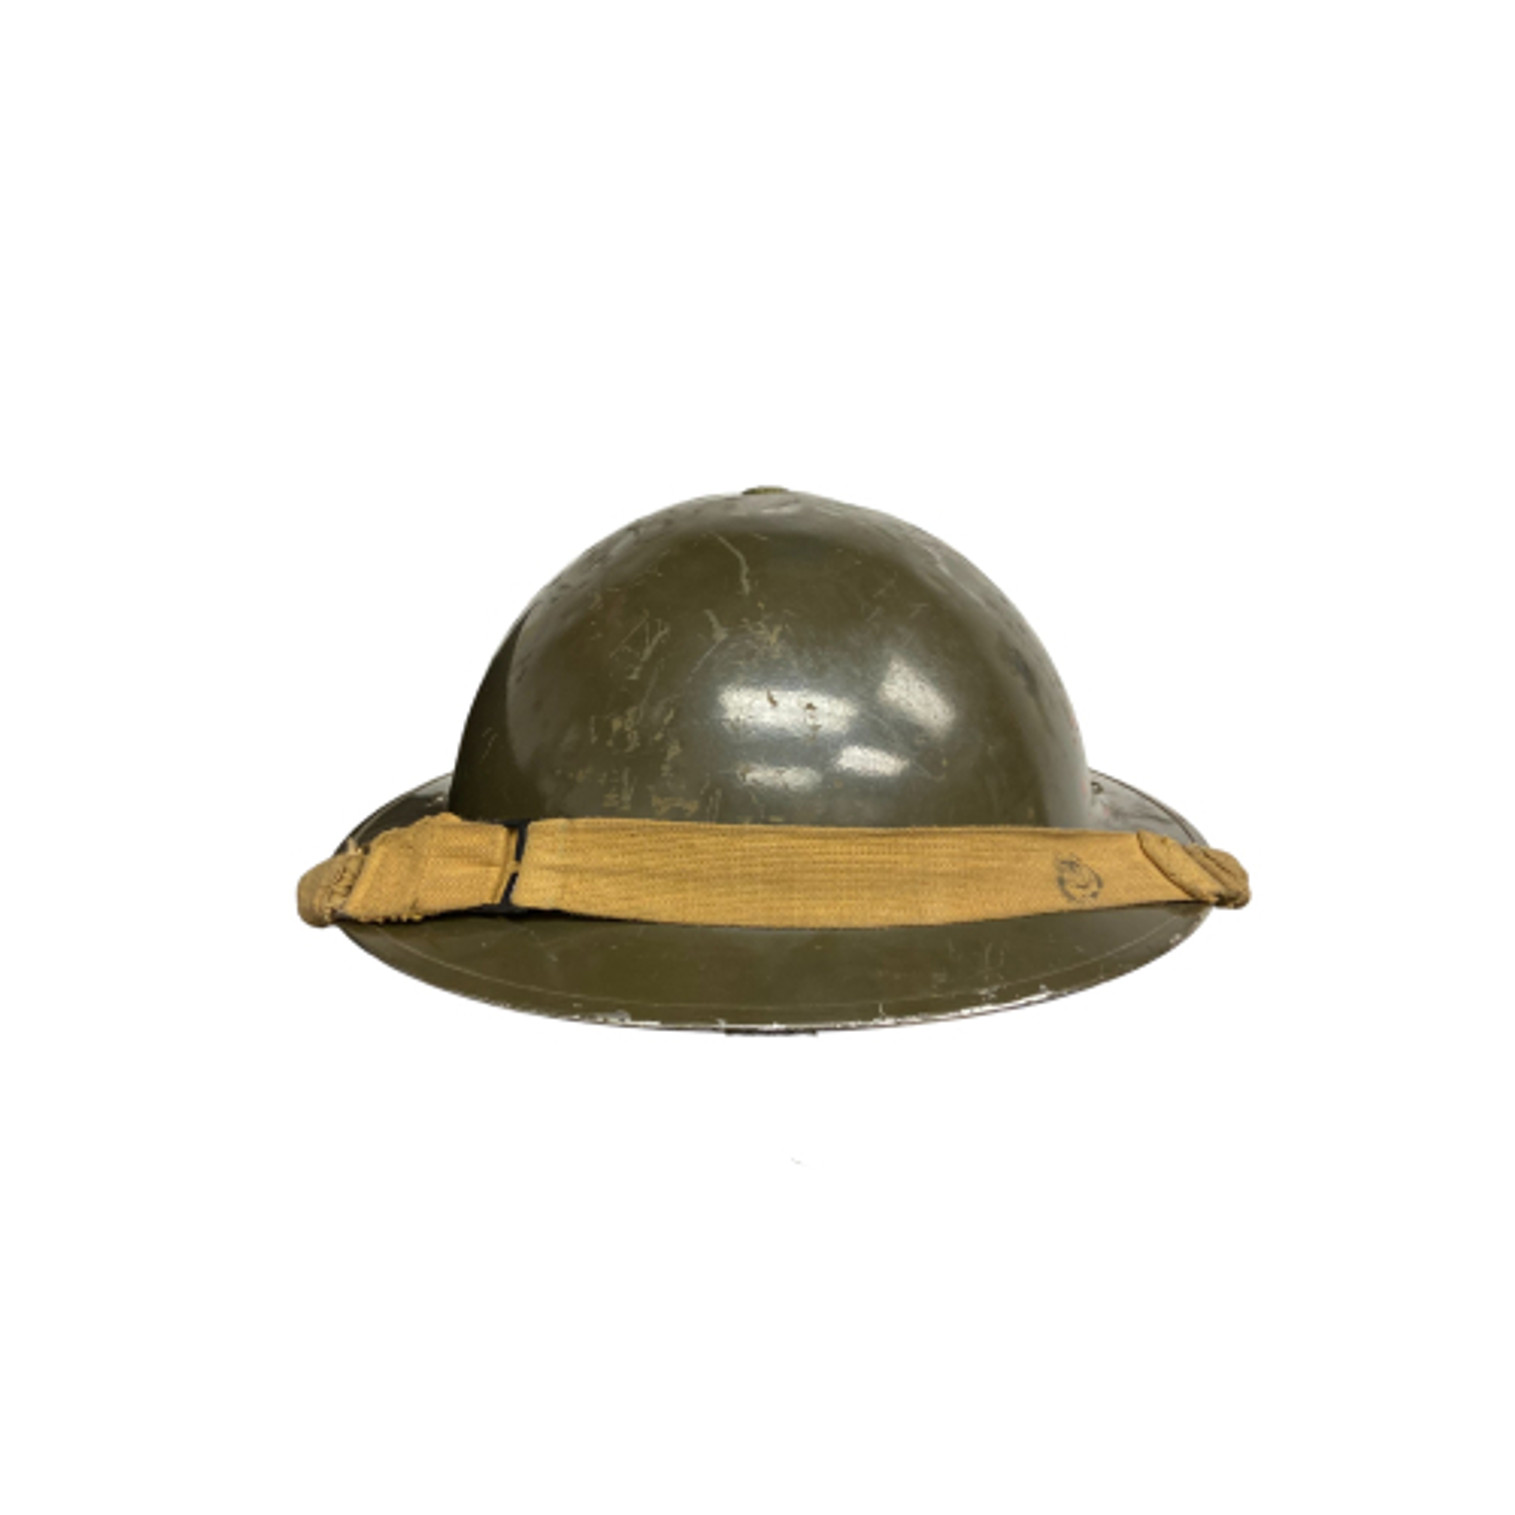 Canadian Armed Forces WW2 Helmet - Canadian Motor Lamp Co.